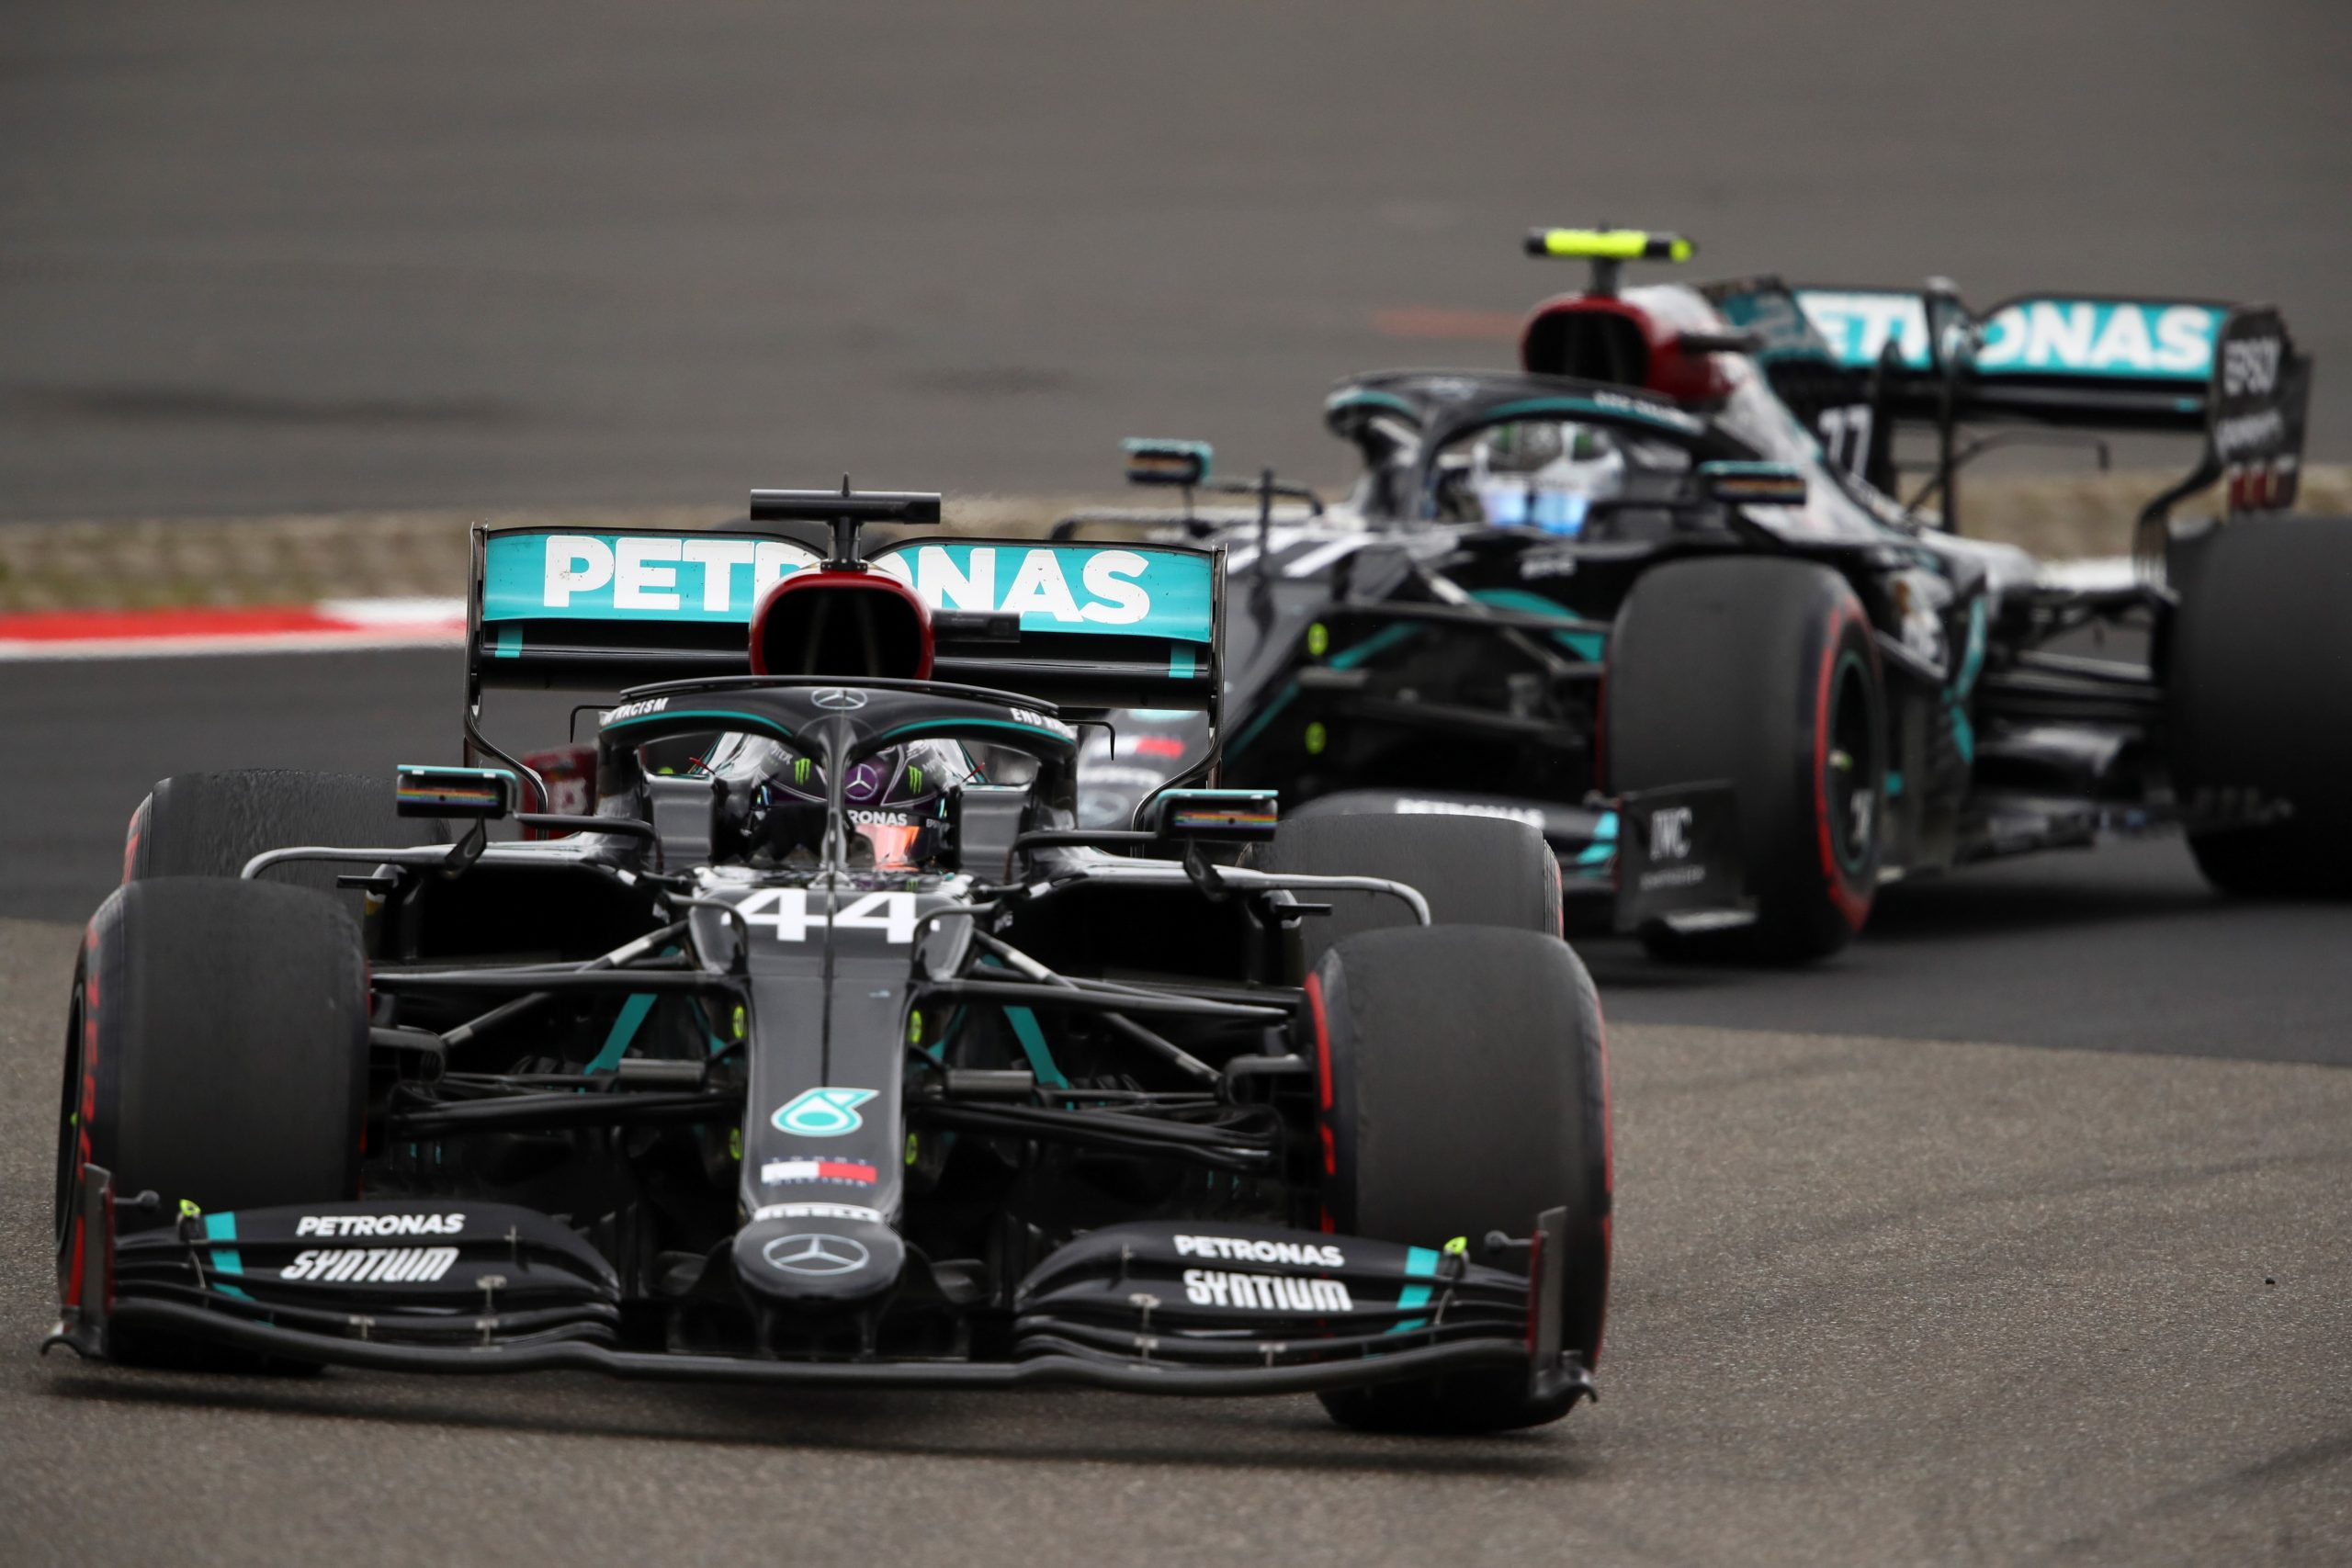 epa08735406 British Formula One driver Lewis Hamilton of Mercedes-AMG Petronas (L) and Finnish Formula One driver Valtteri Bottas of Mercedes-AMG Petronas (R) in action during the 2020 Formula One Eifel Grand Prix at the Nuerburgring race track in Nuerburg, Germany, 11 October 2020.  EPA/Bryn Lennon / Pool